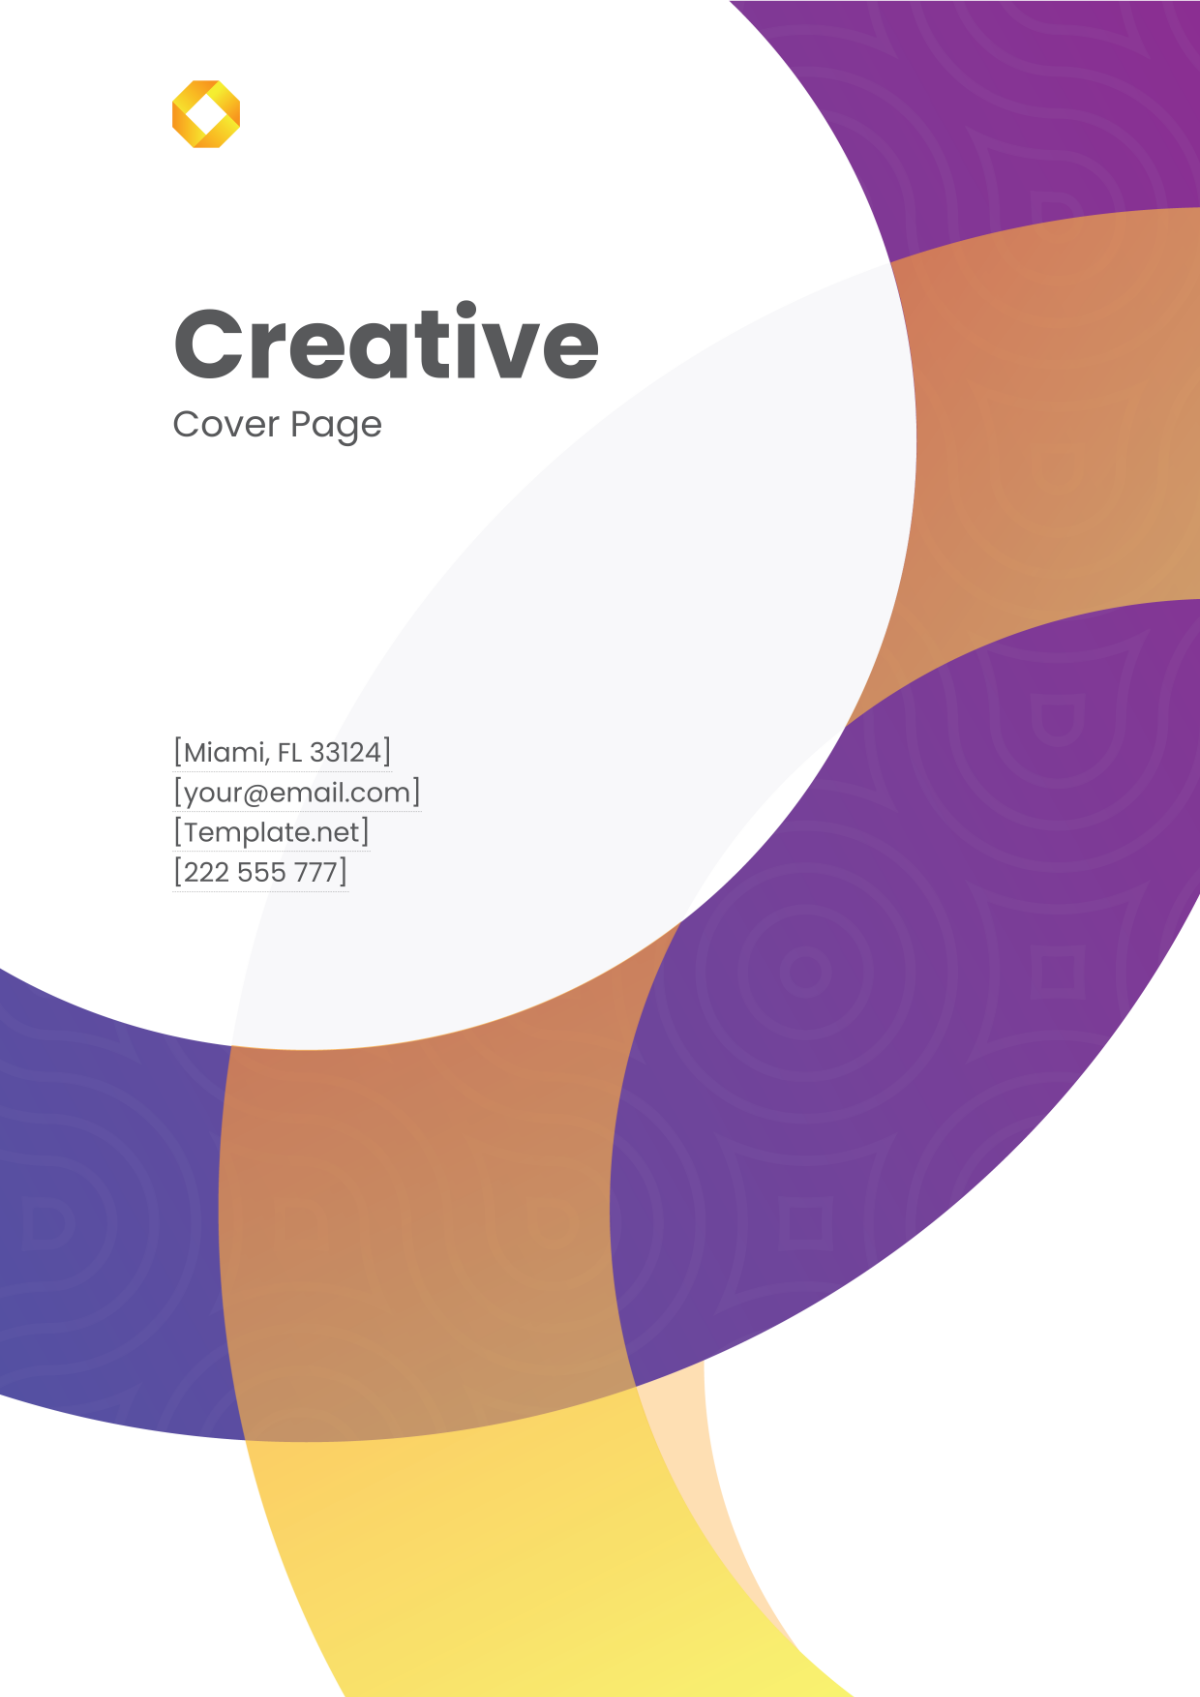 Creative Cover Page Logo